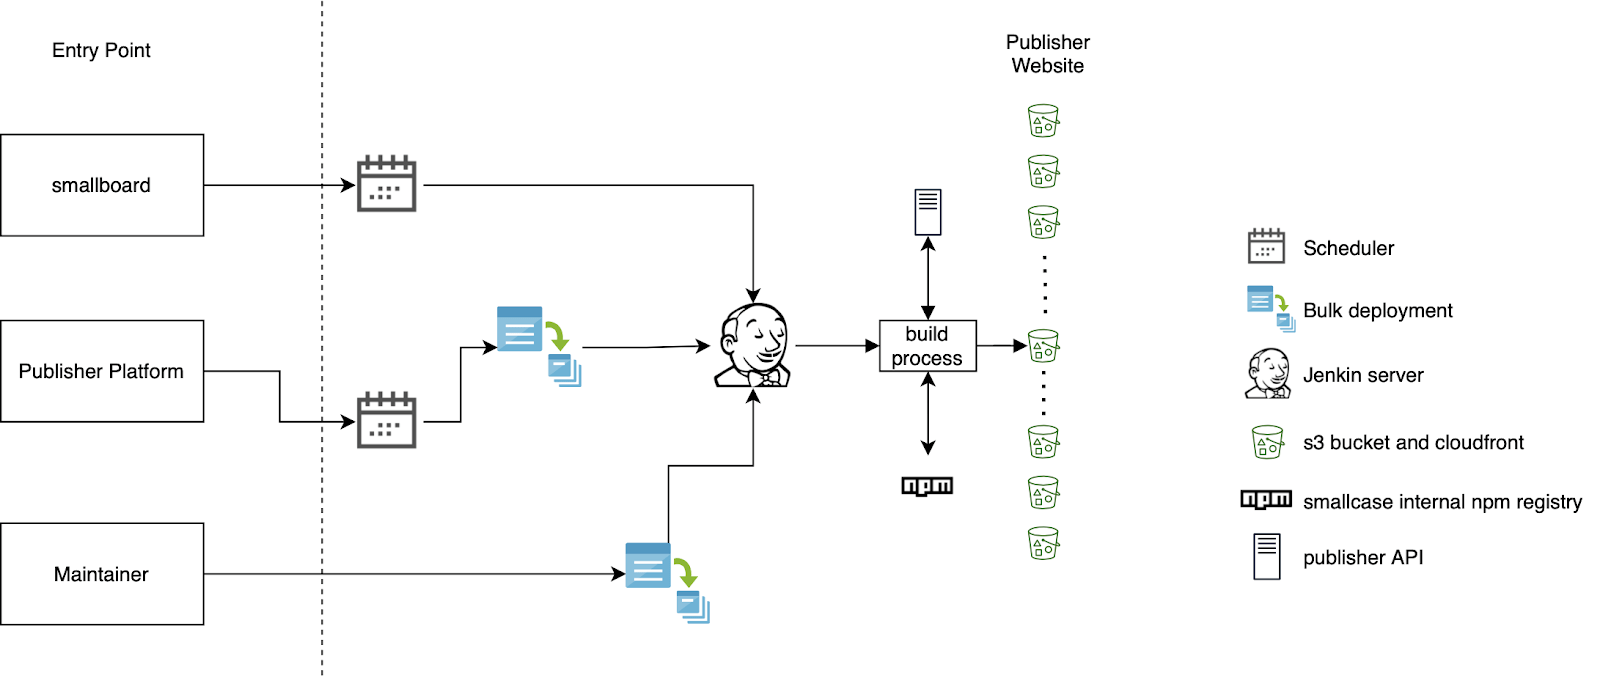 Deployment process of v1 of microsite